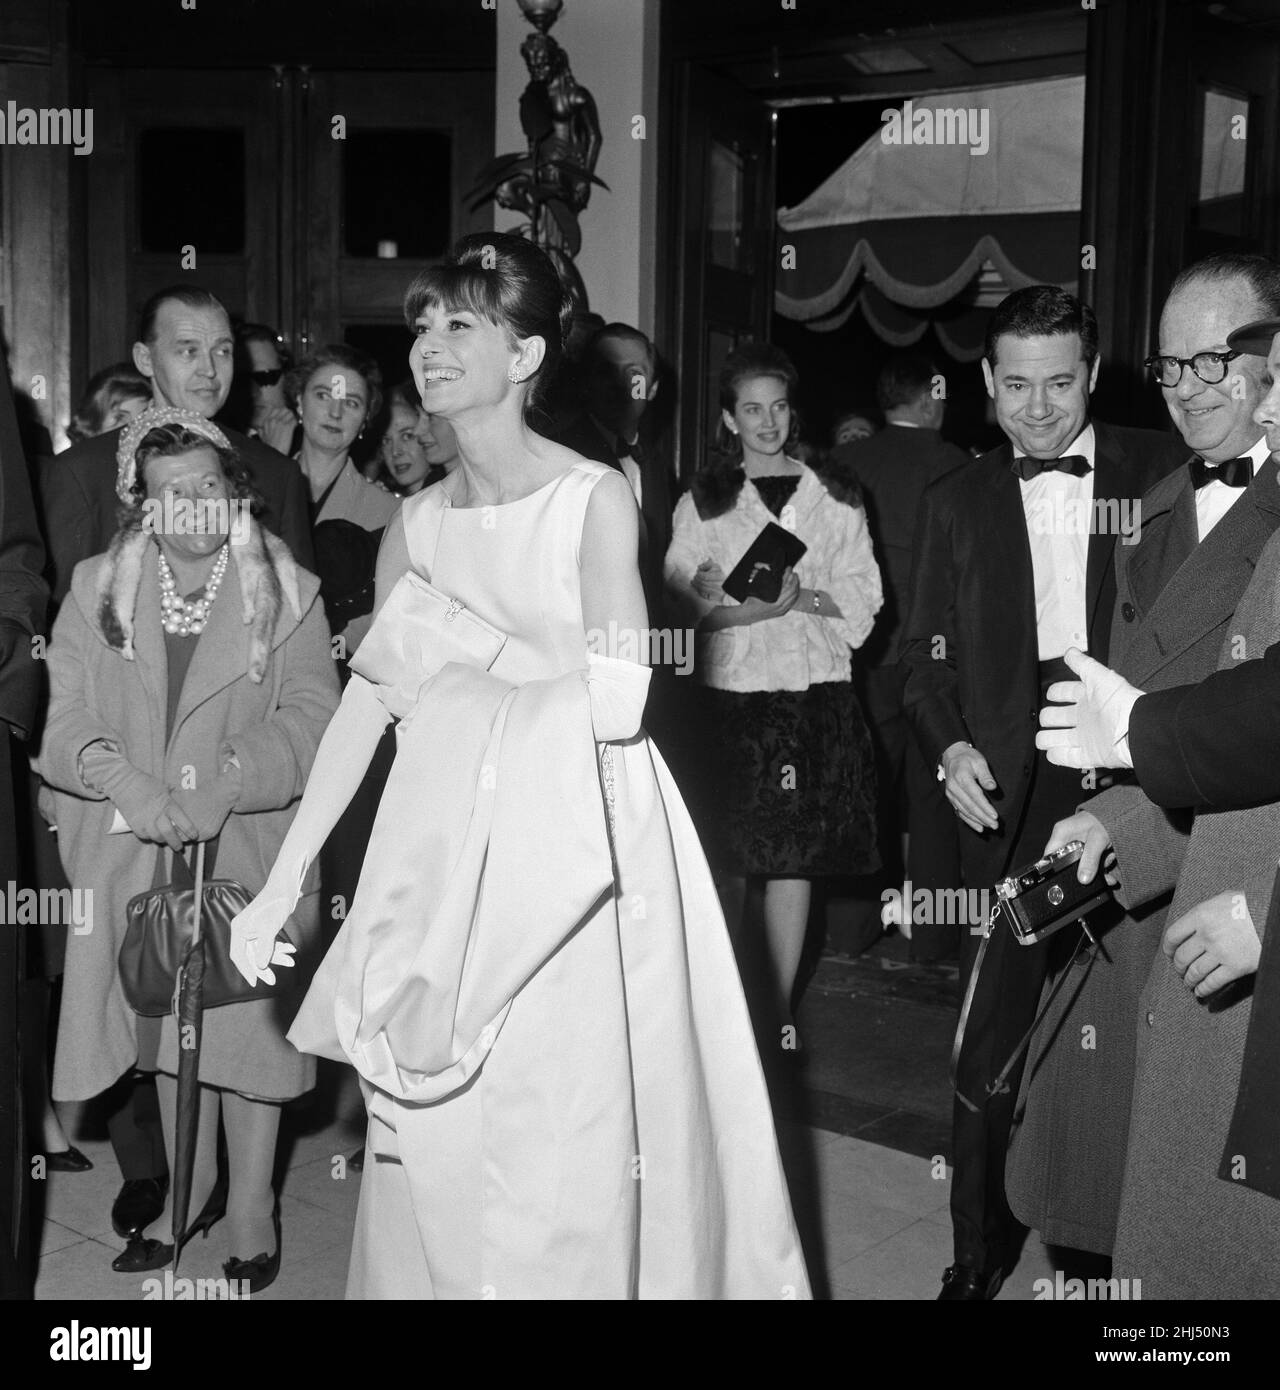 Audrey Hepburn at the London premier of 'Breakfast at Tiffany's'. Plaza Theatre, London. 19th October 1961. Stock Photo